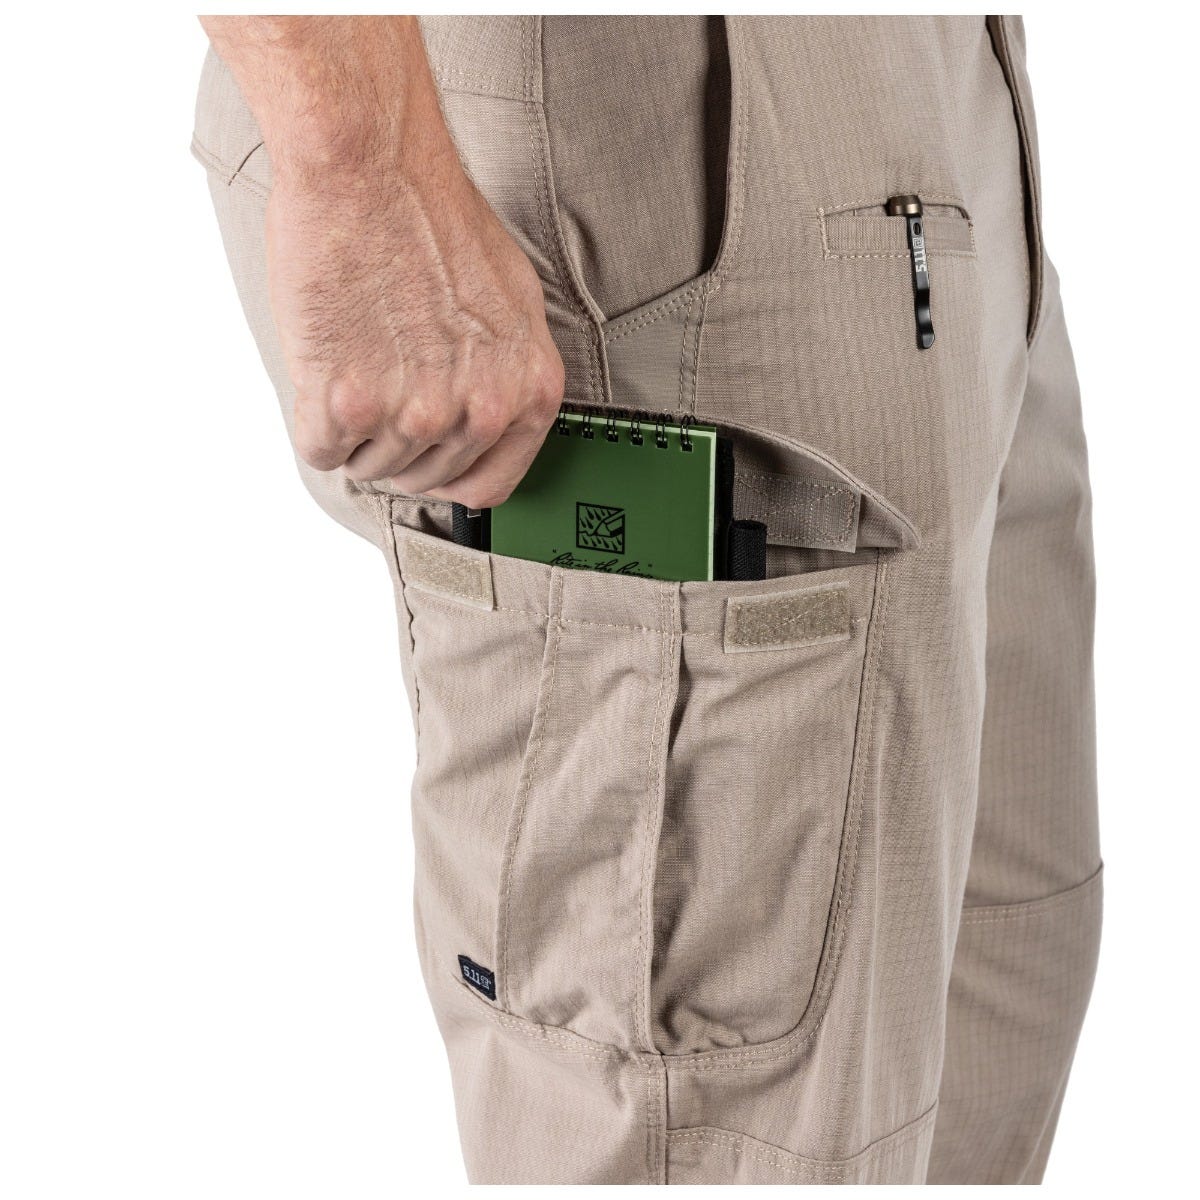 Durable and Functional Pant: Ideal for demanding operational environments.